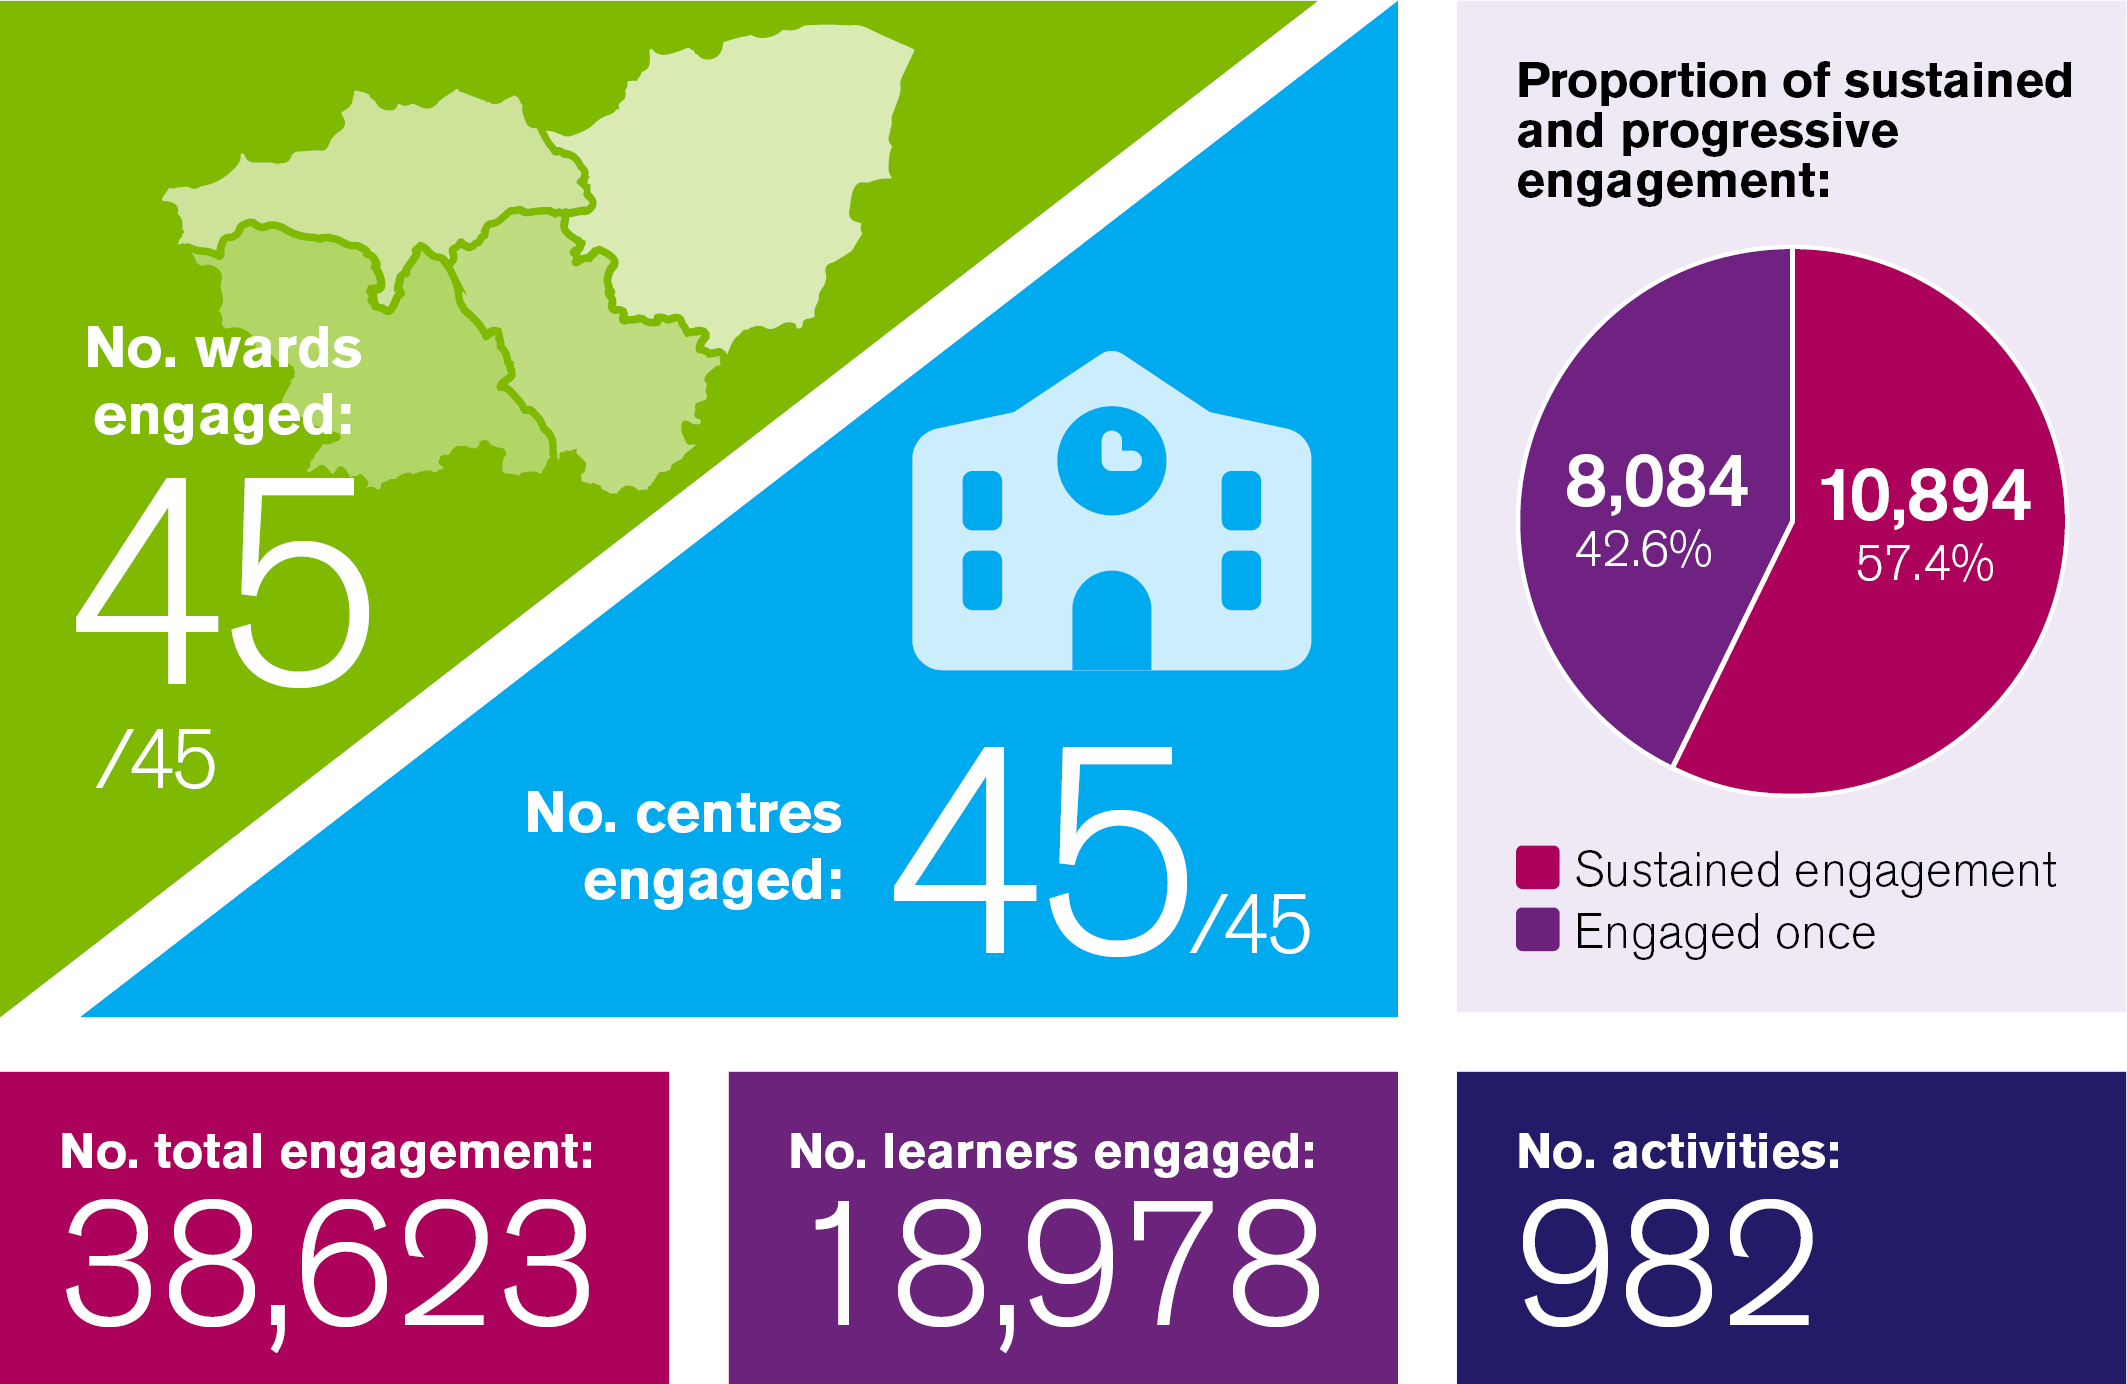 Number of wards engaged: 45/45

Number of centres engaged: 45/45

Proportion of sustained and progressive engagement: 
8084 Engaged once (42.6%)
10894 Sustained engagement (57.4%)

Number of total engagements: 38623

Number of learners engaged: 18978

Number of activities: 982 